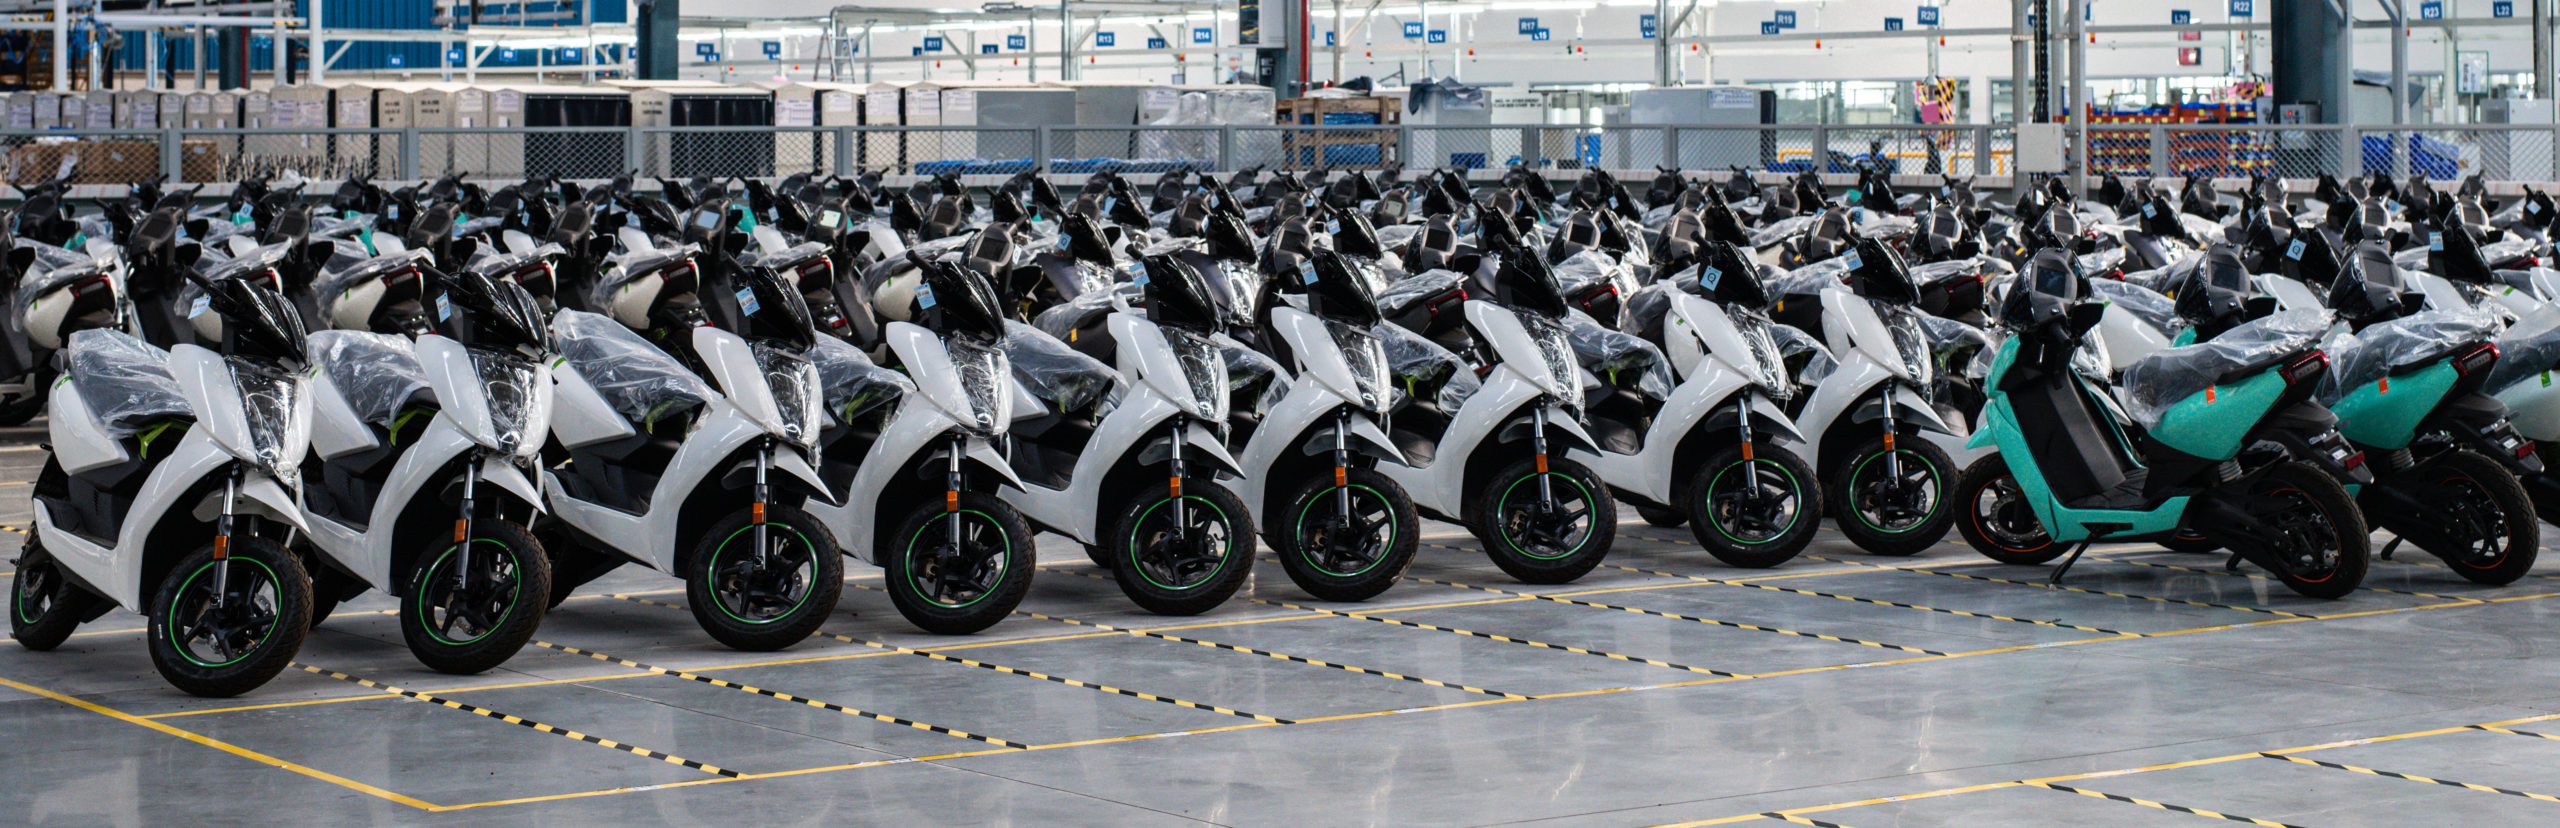 EV maker Ather Energy raises $66m from existing backer Hero MotoCorp